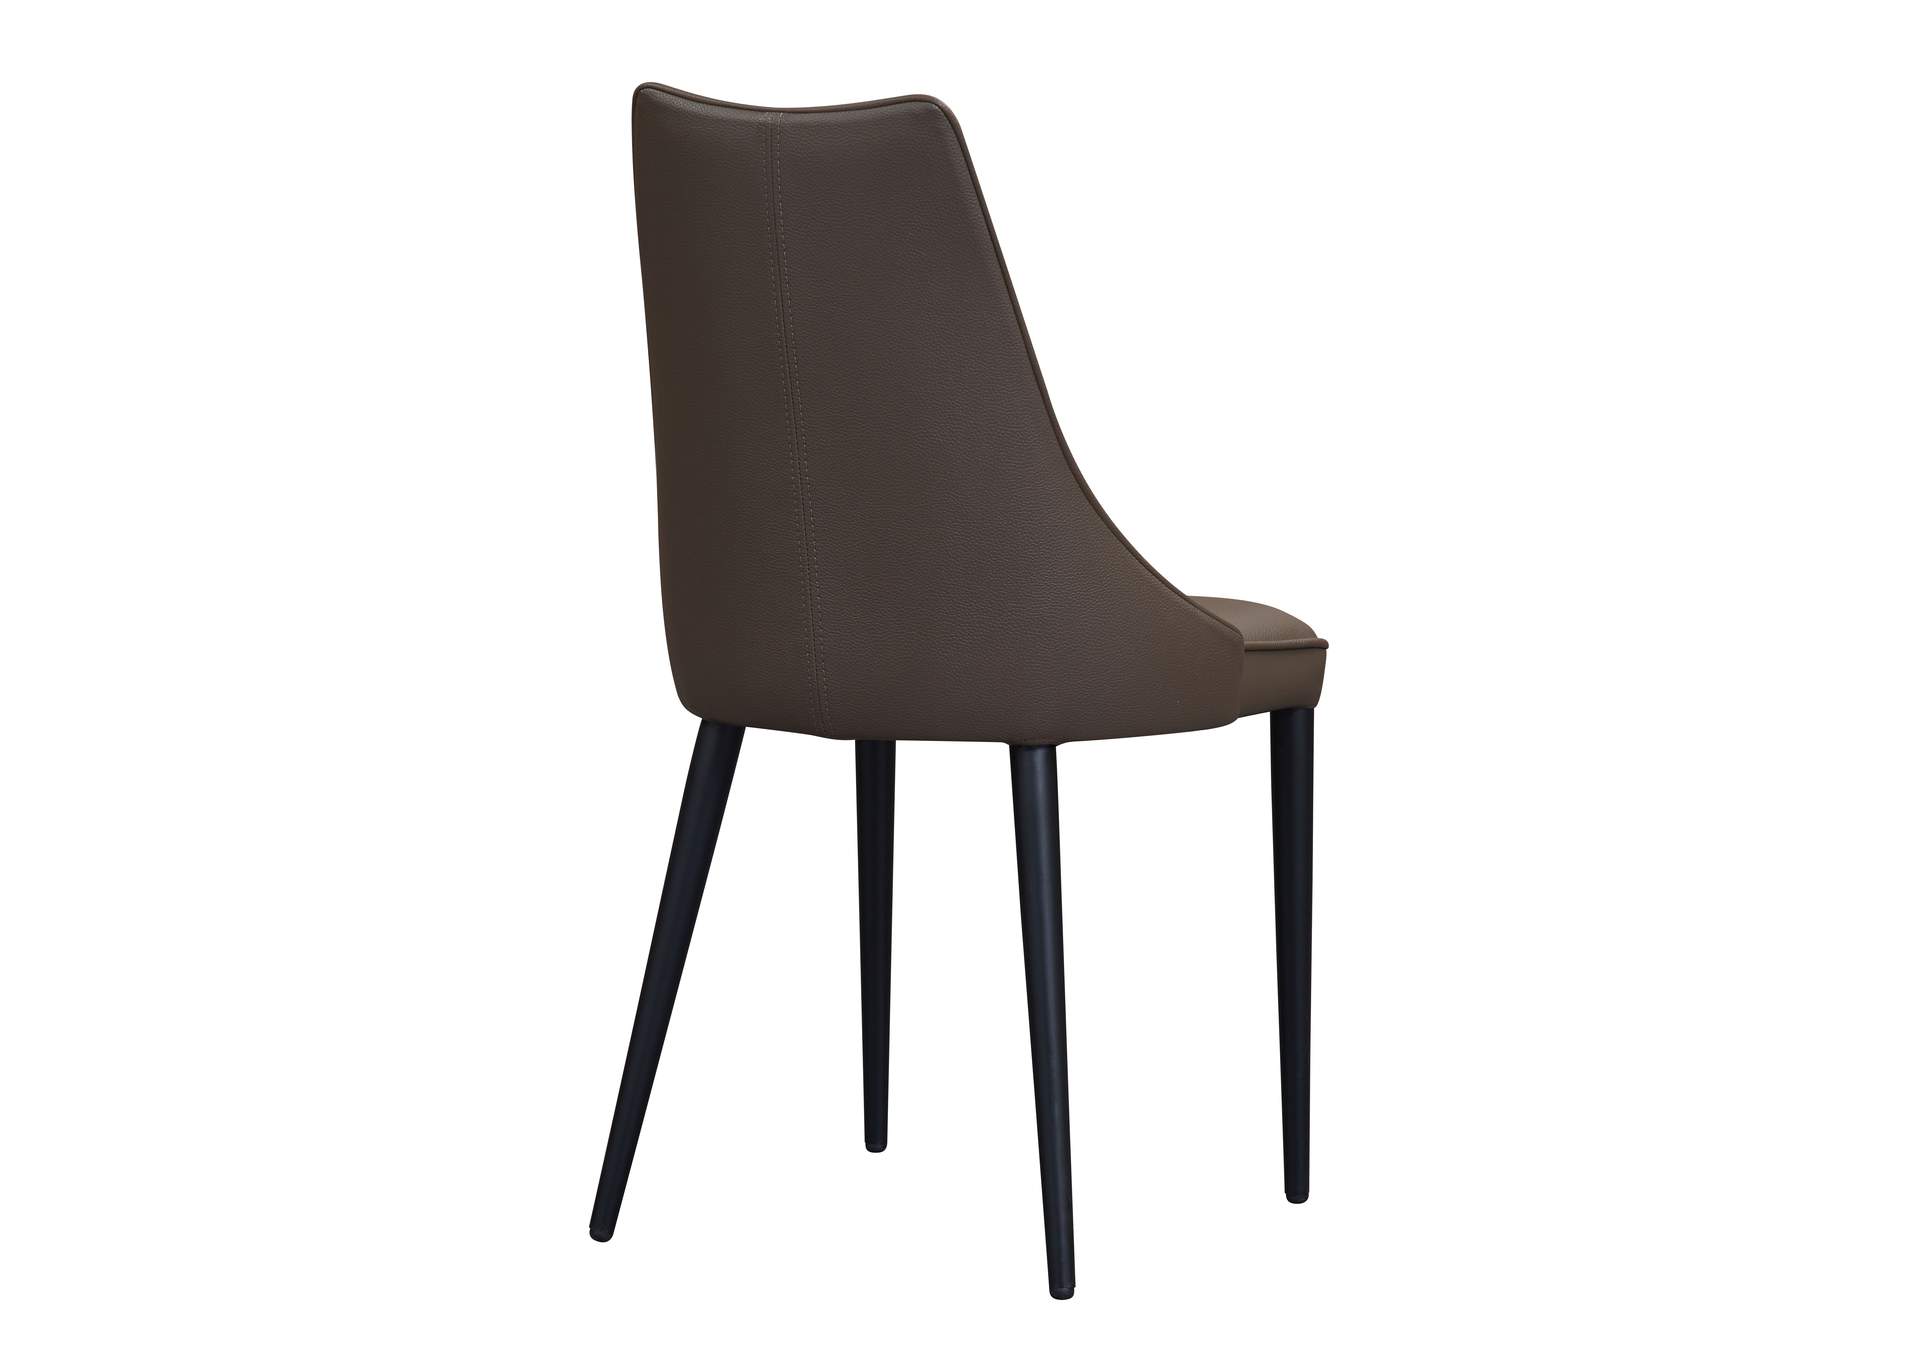 Milano Leather Dining Chair In Chocolate,J&M Furniture